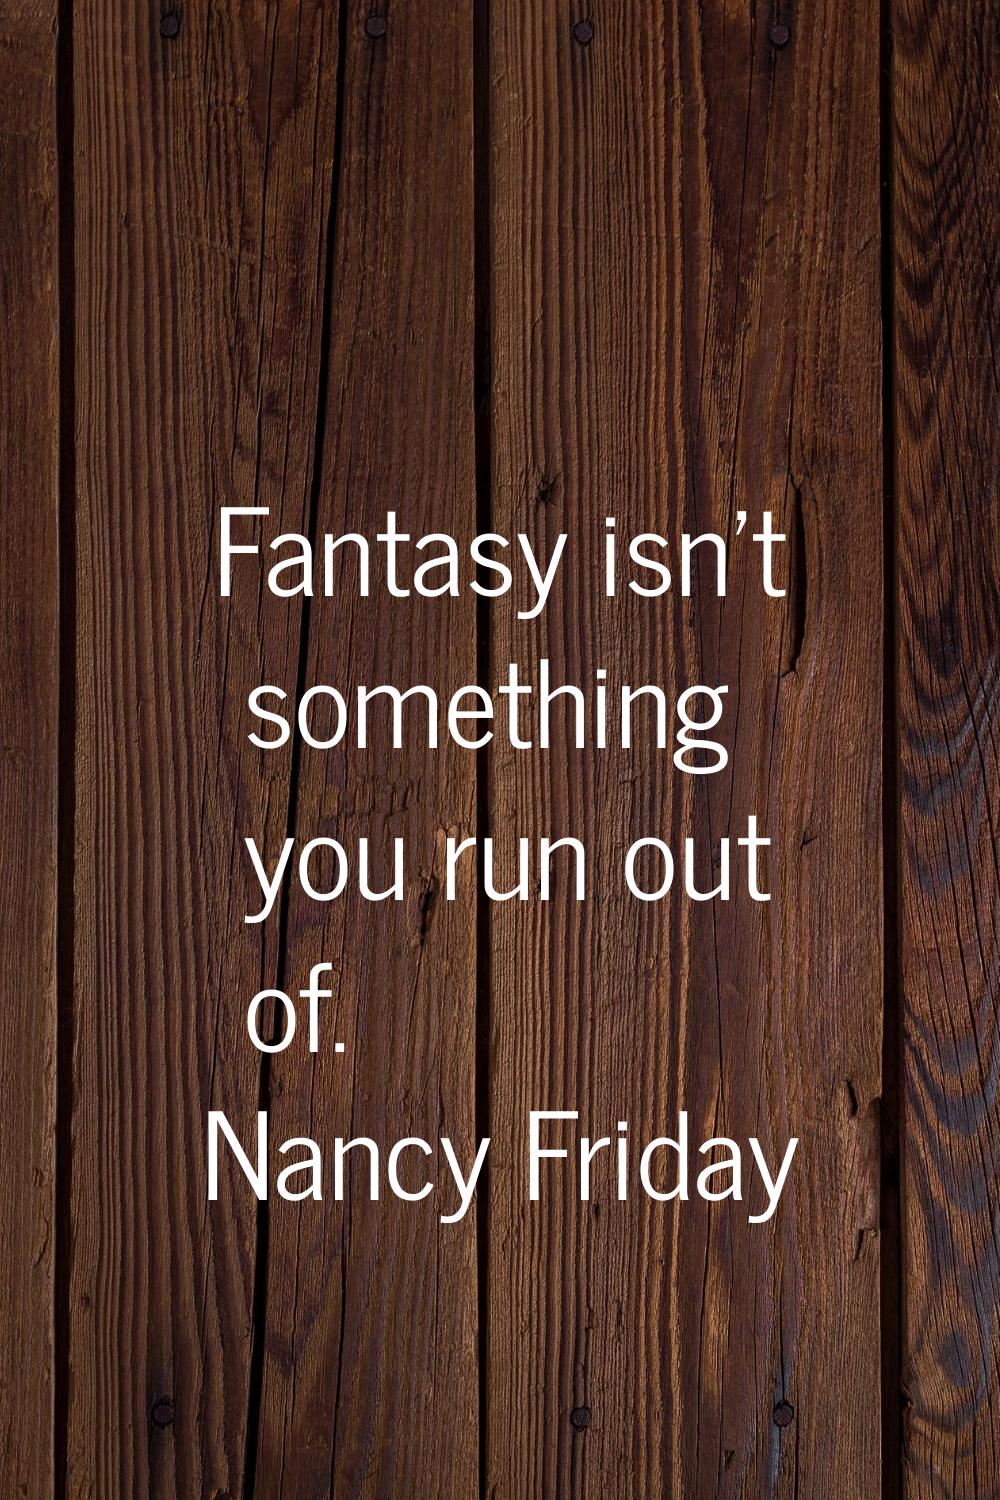 Fantasy isn't something you run out of.